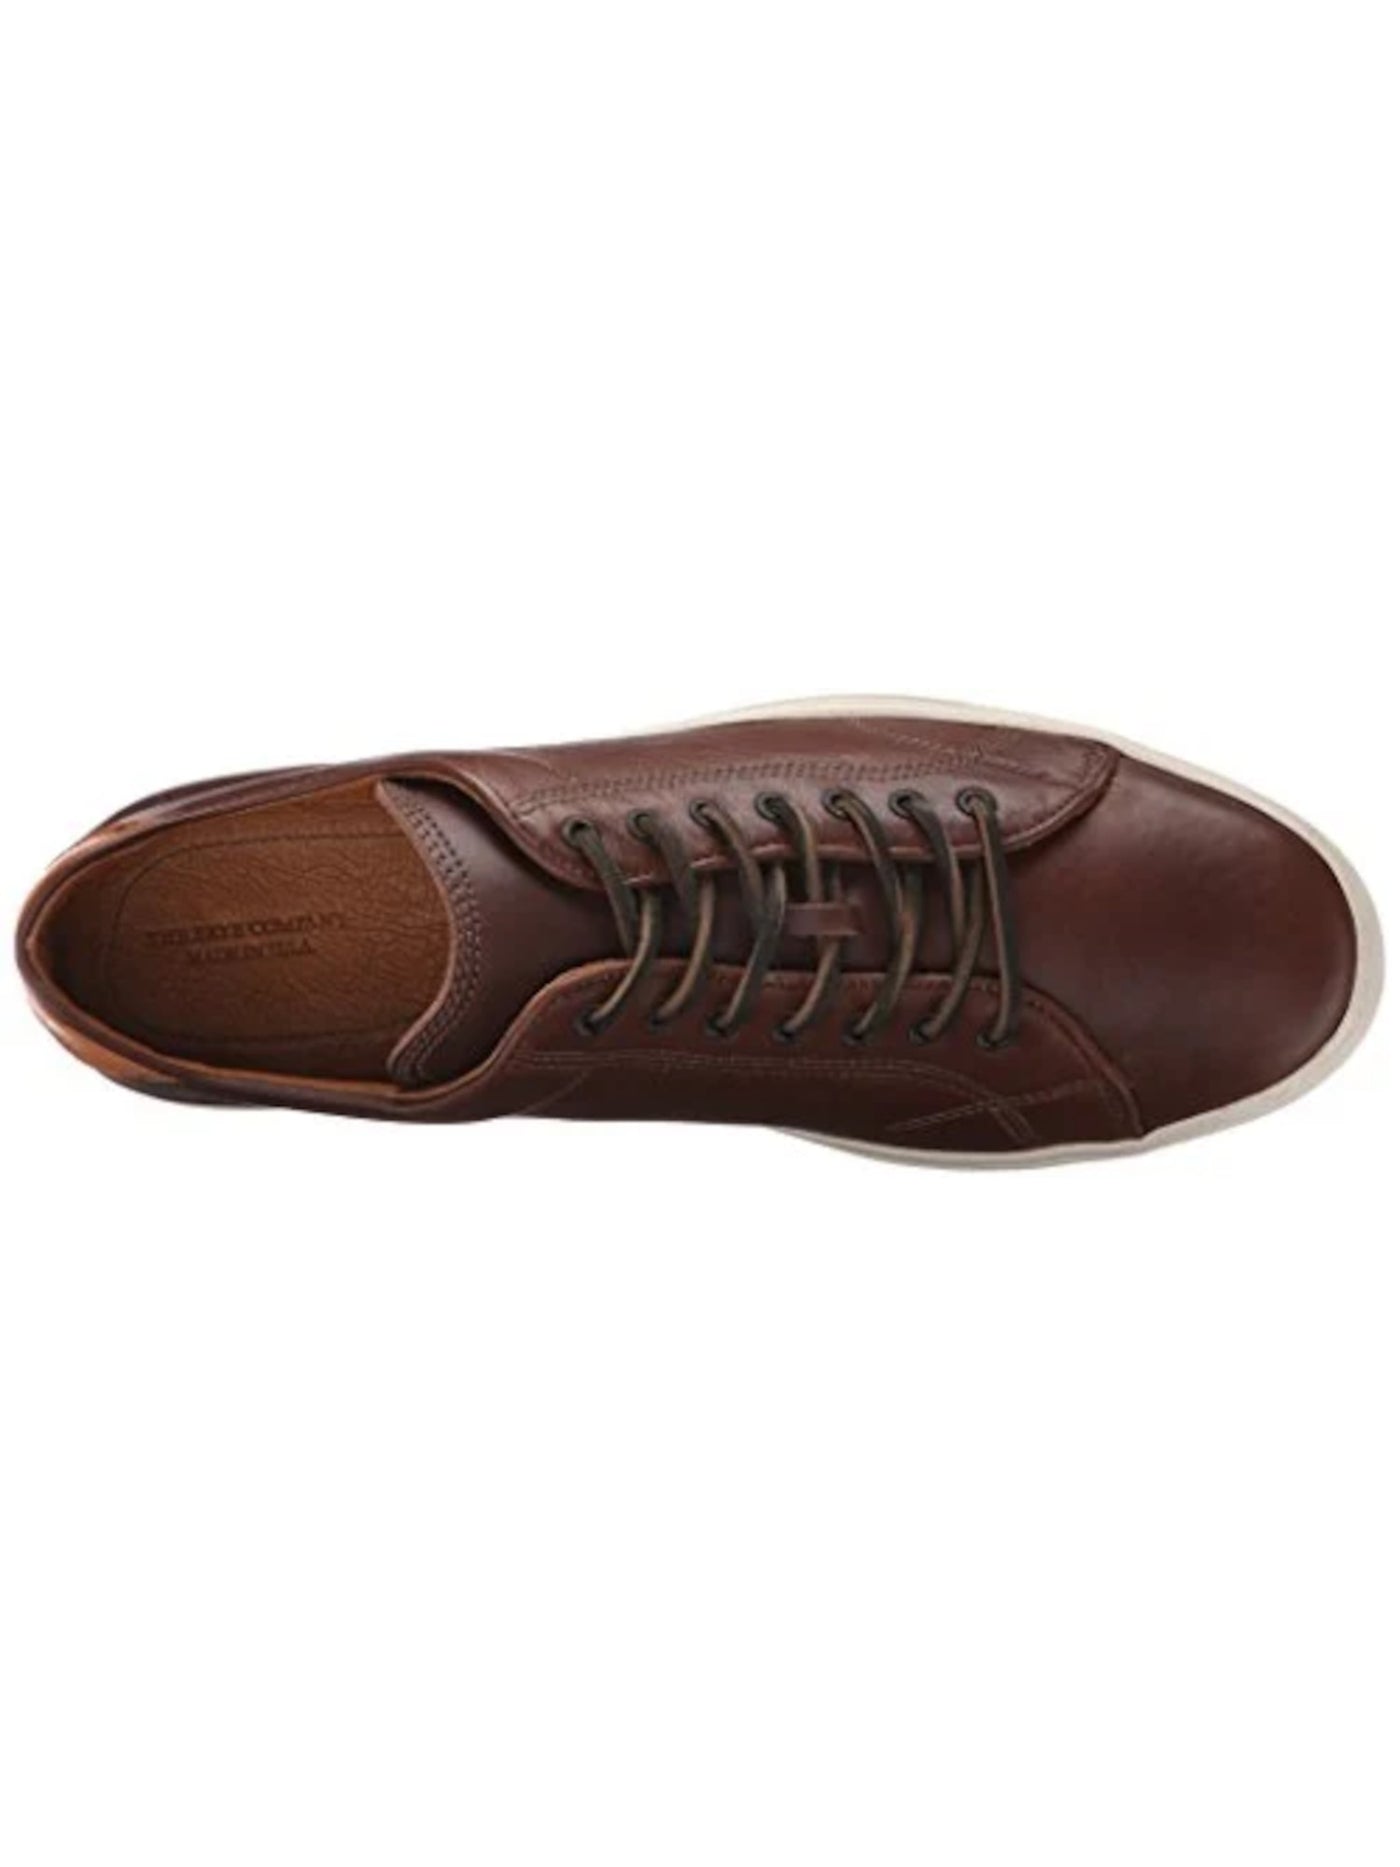 FRYE Mens Brown Comfort Walker Round Toe Platform Lace-Up Leather Athletic Sneakers Shoes M